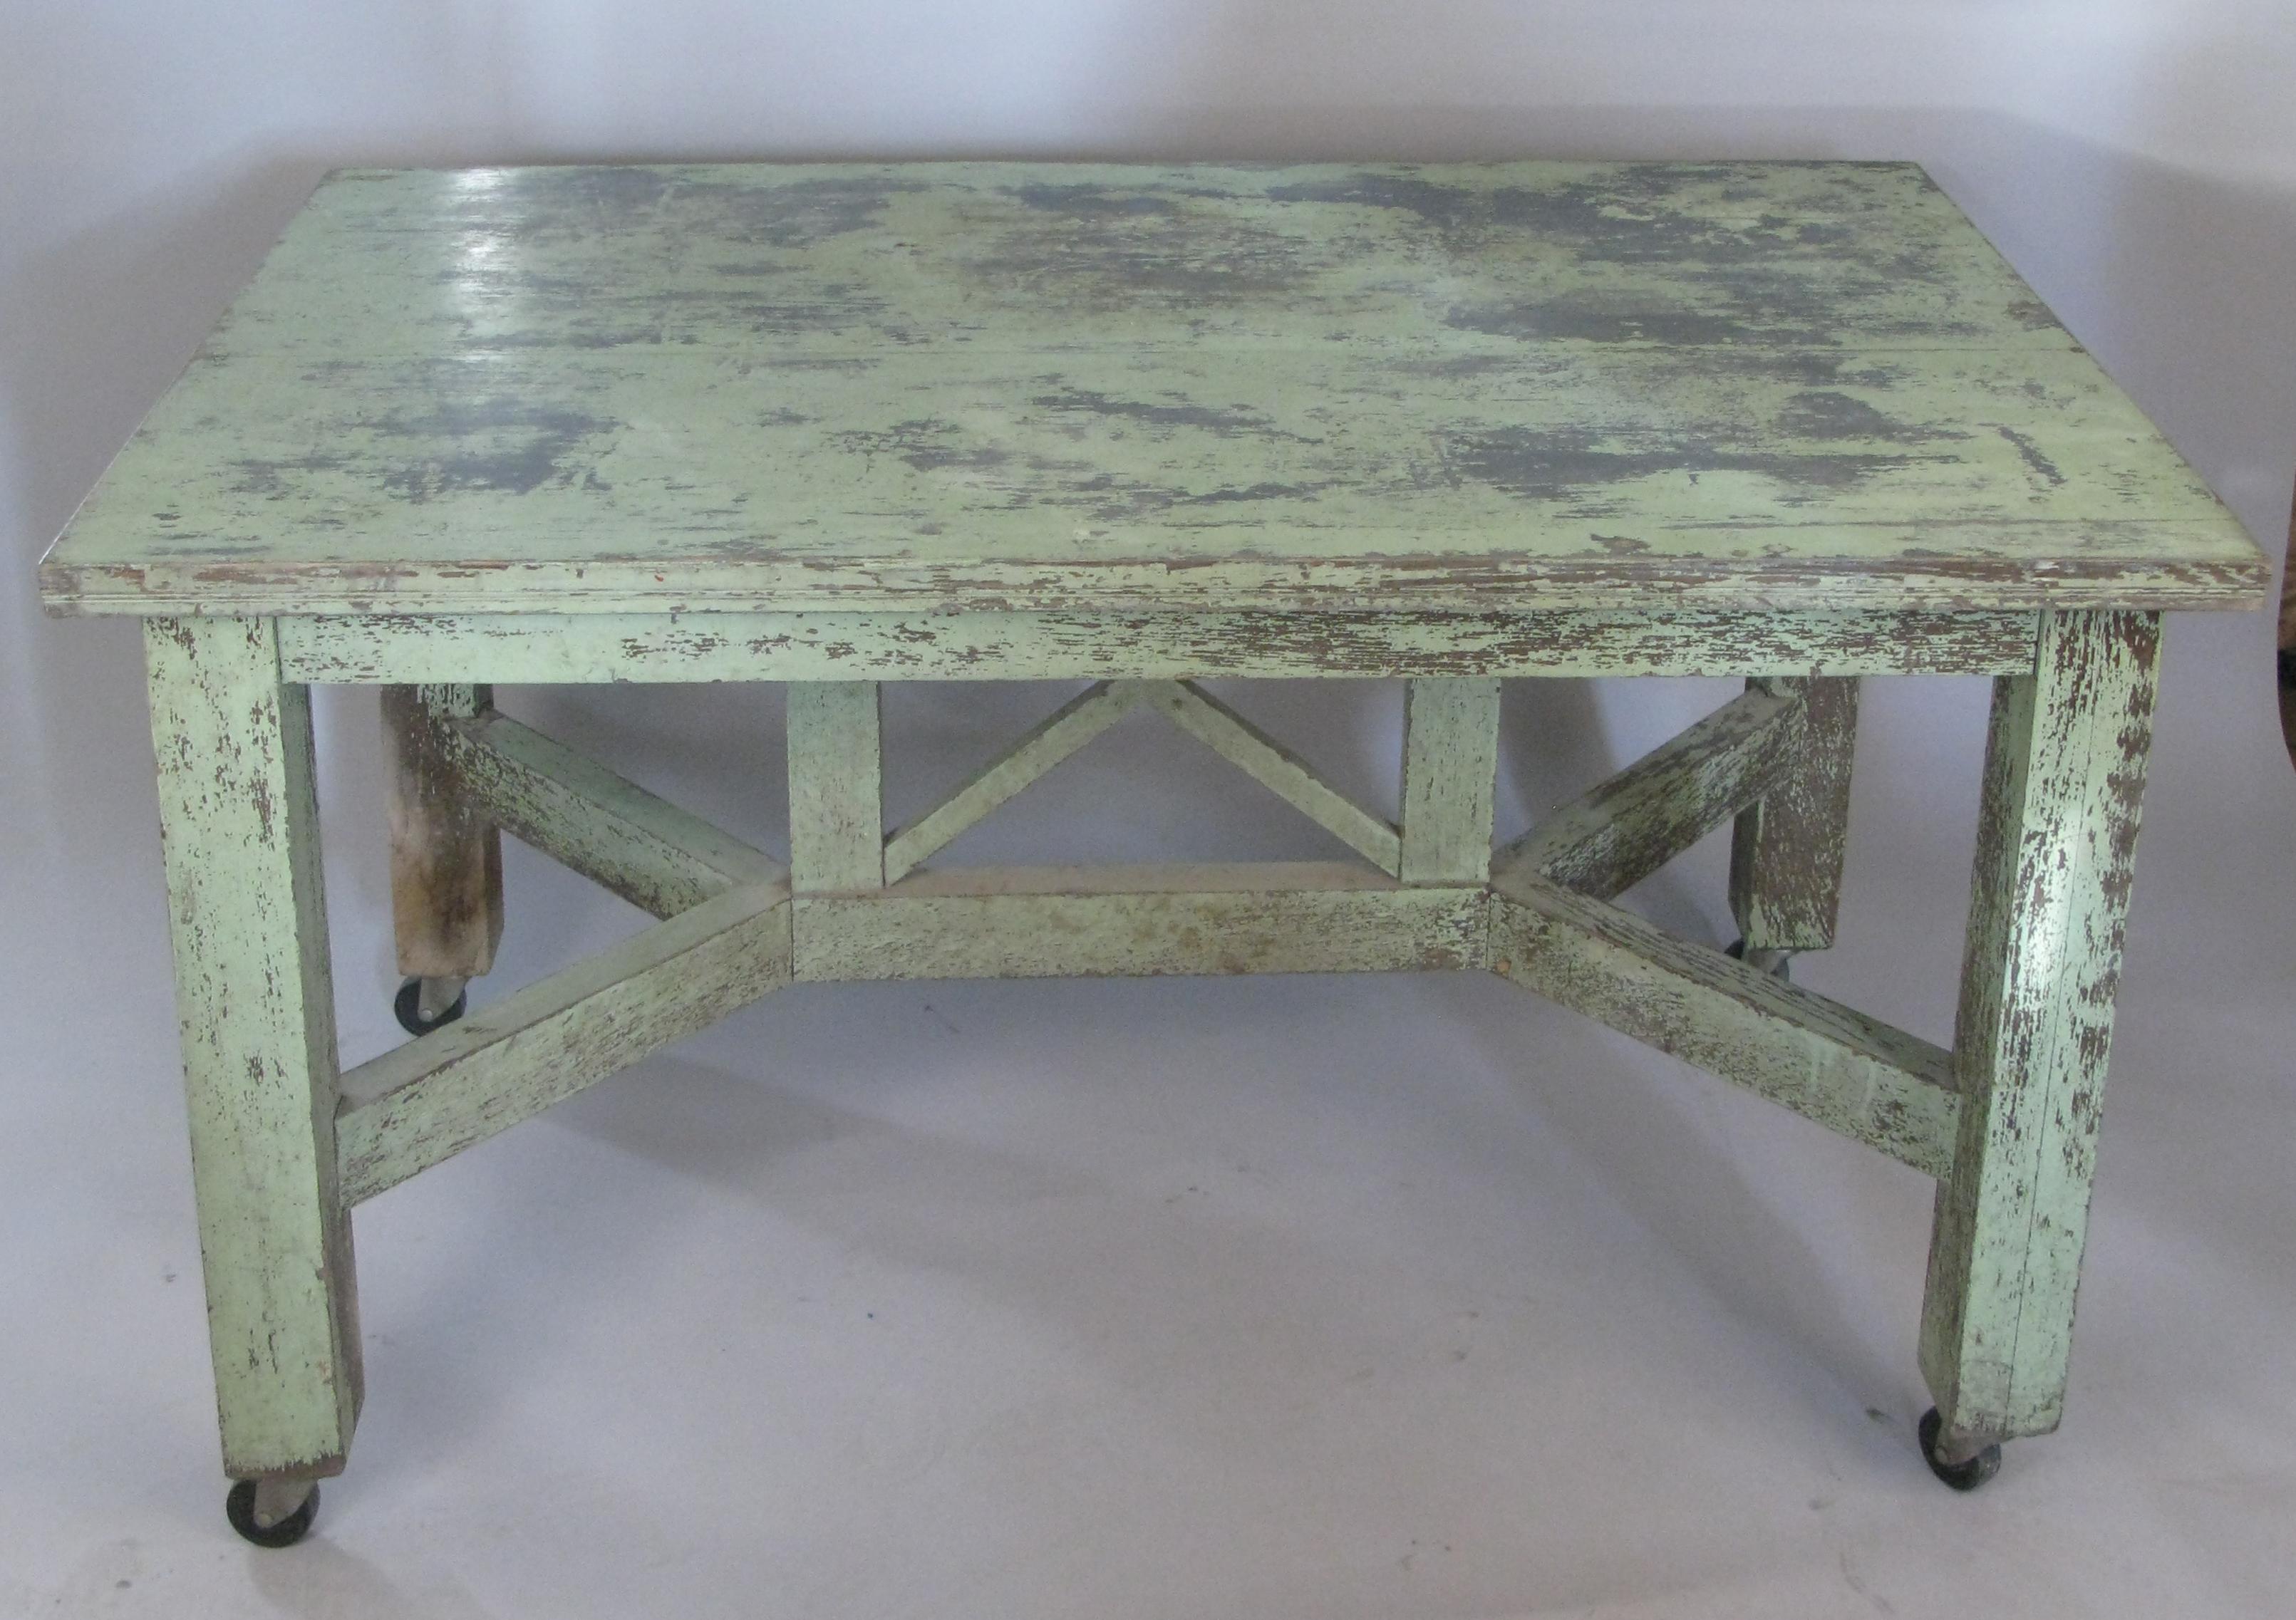 A very handsome antique 1940s country table with the remains of its original painted finish in green. the table has a very interesting base with an X-brace in the center, and is raised on casters, which could be removed. one side of the table has